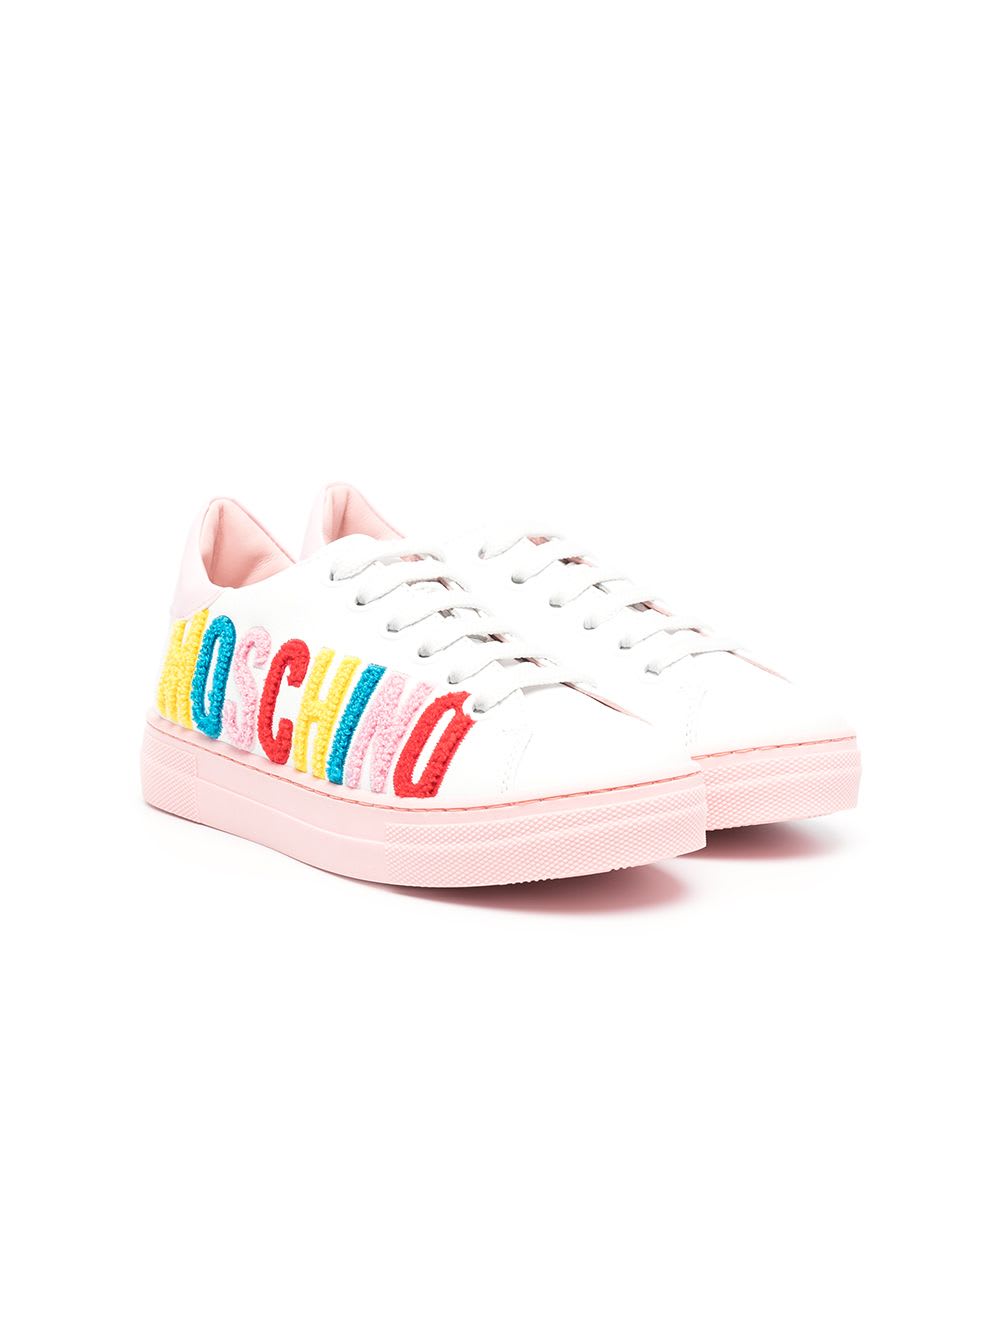 Moschino Sneakers With Multicolored Writing